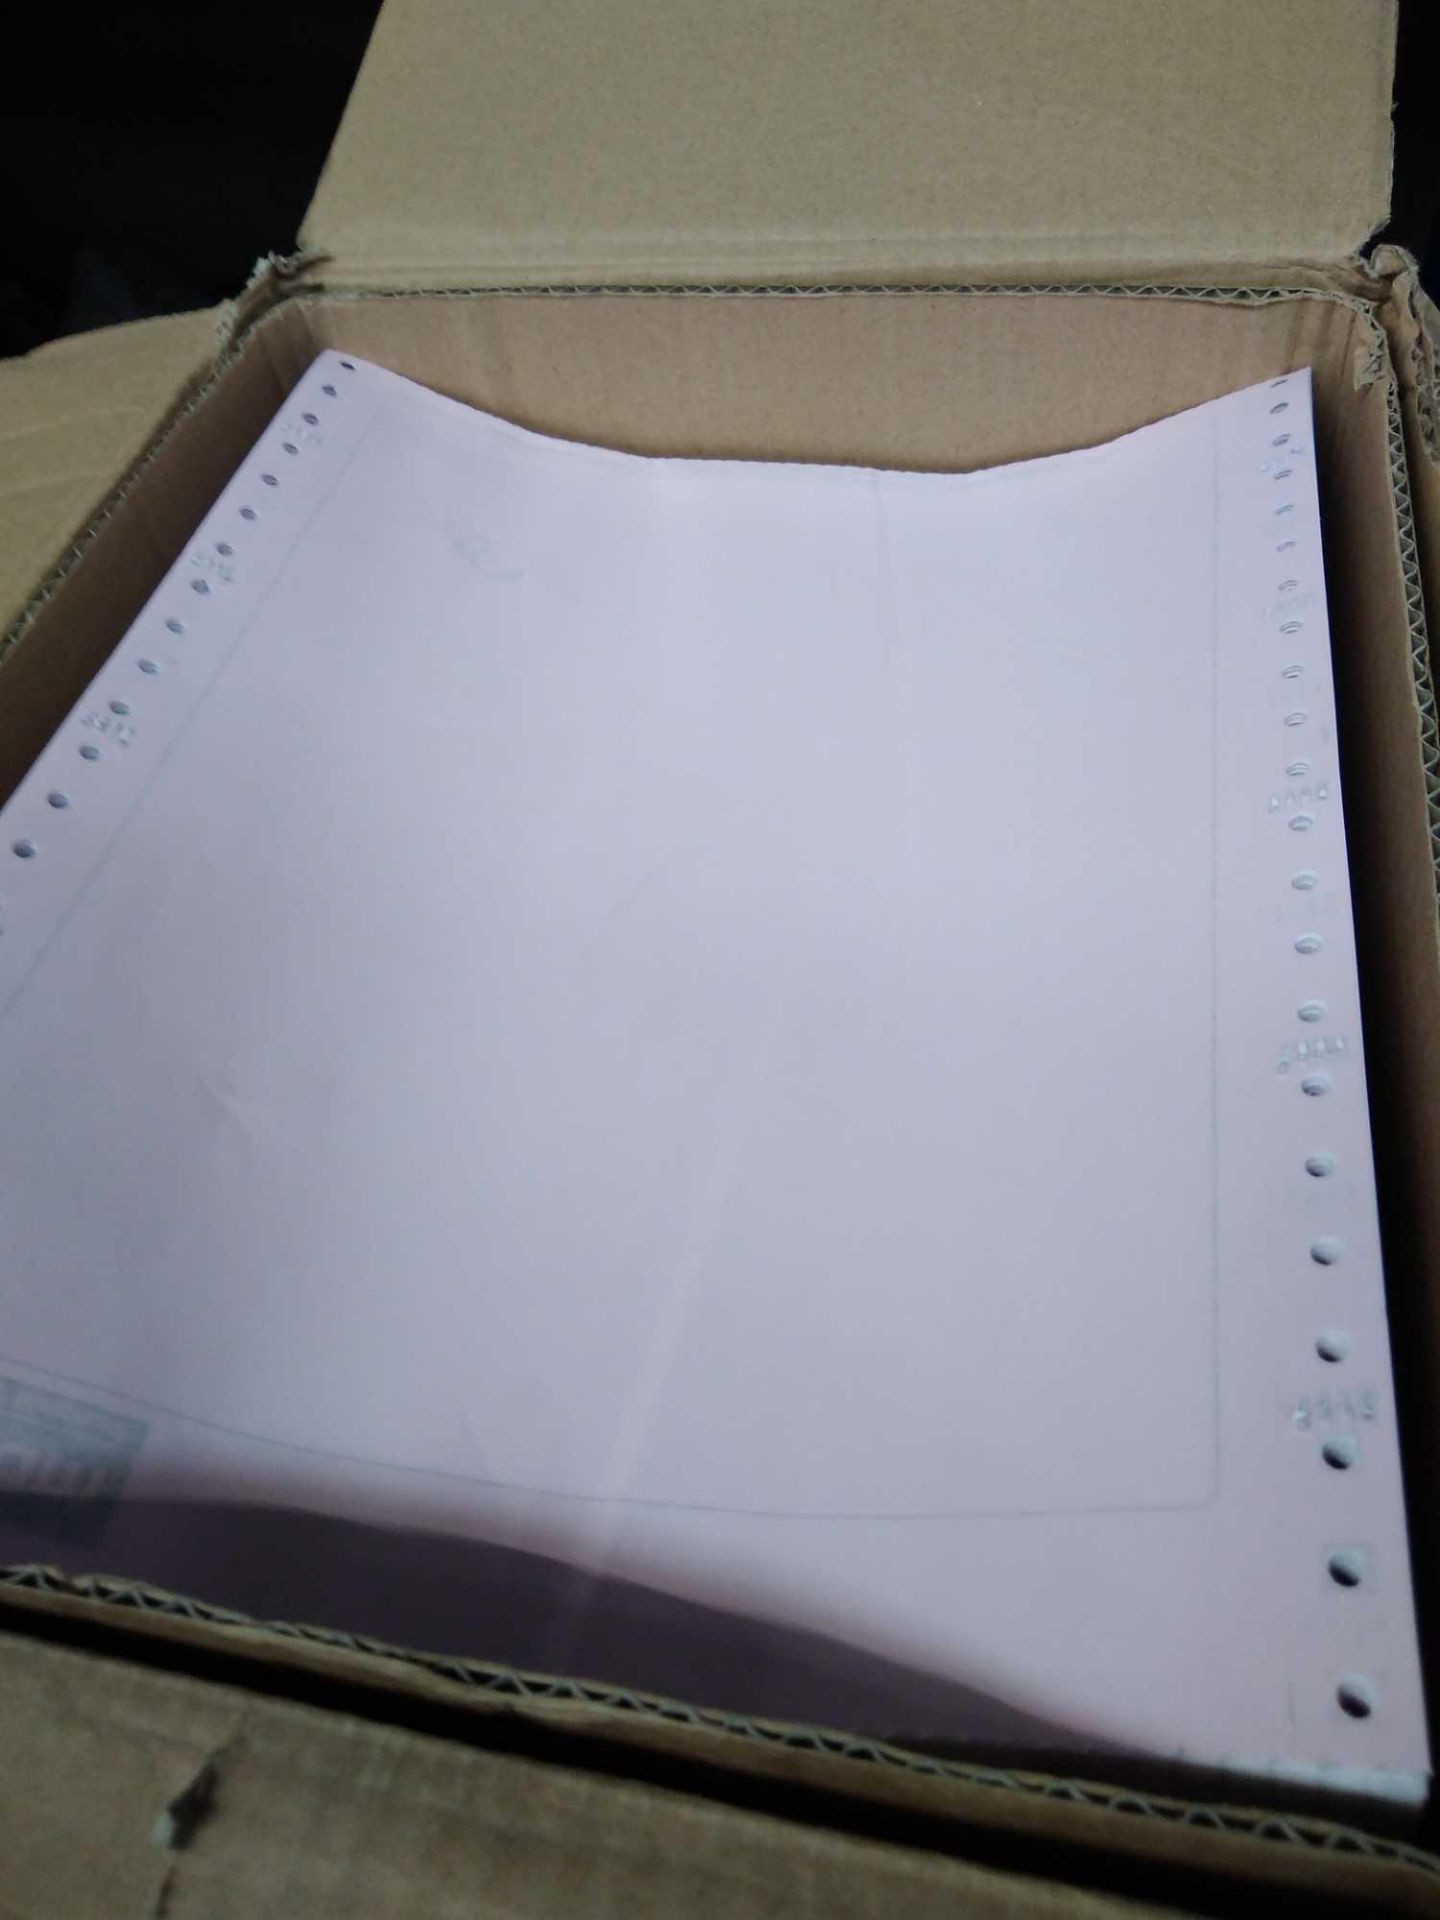 1 LOT TO CONTAIN 1000 ADVICE NOTES ON CARBON PAPER SO CAN BE USED AS RECEIPTS OR SCRIBBLE SHEETS.